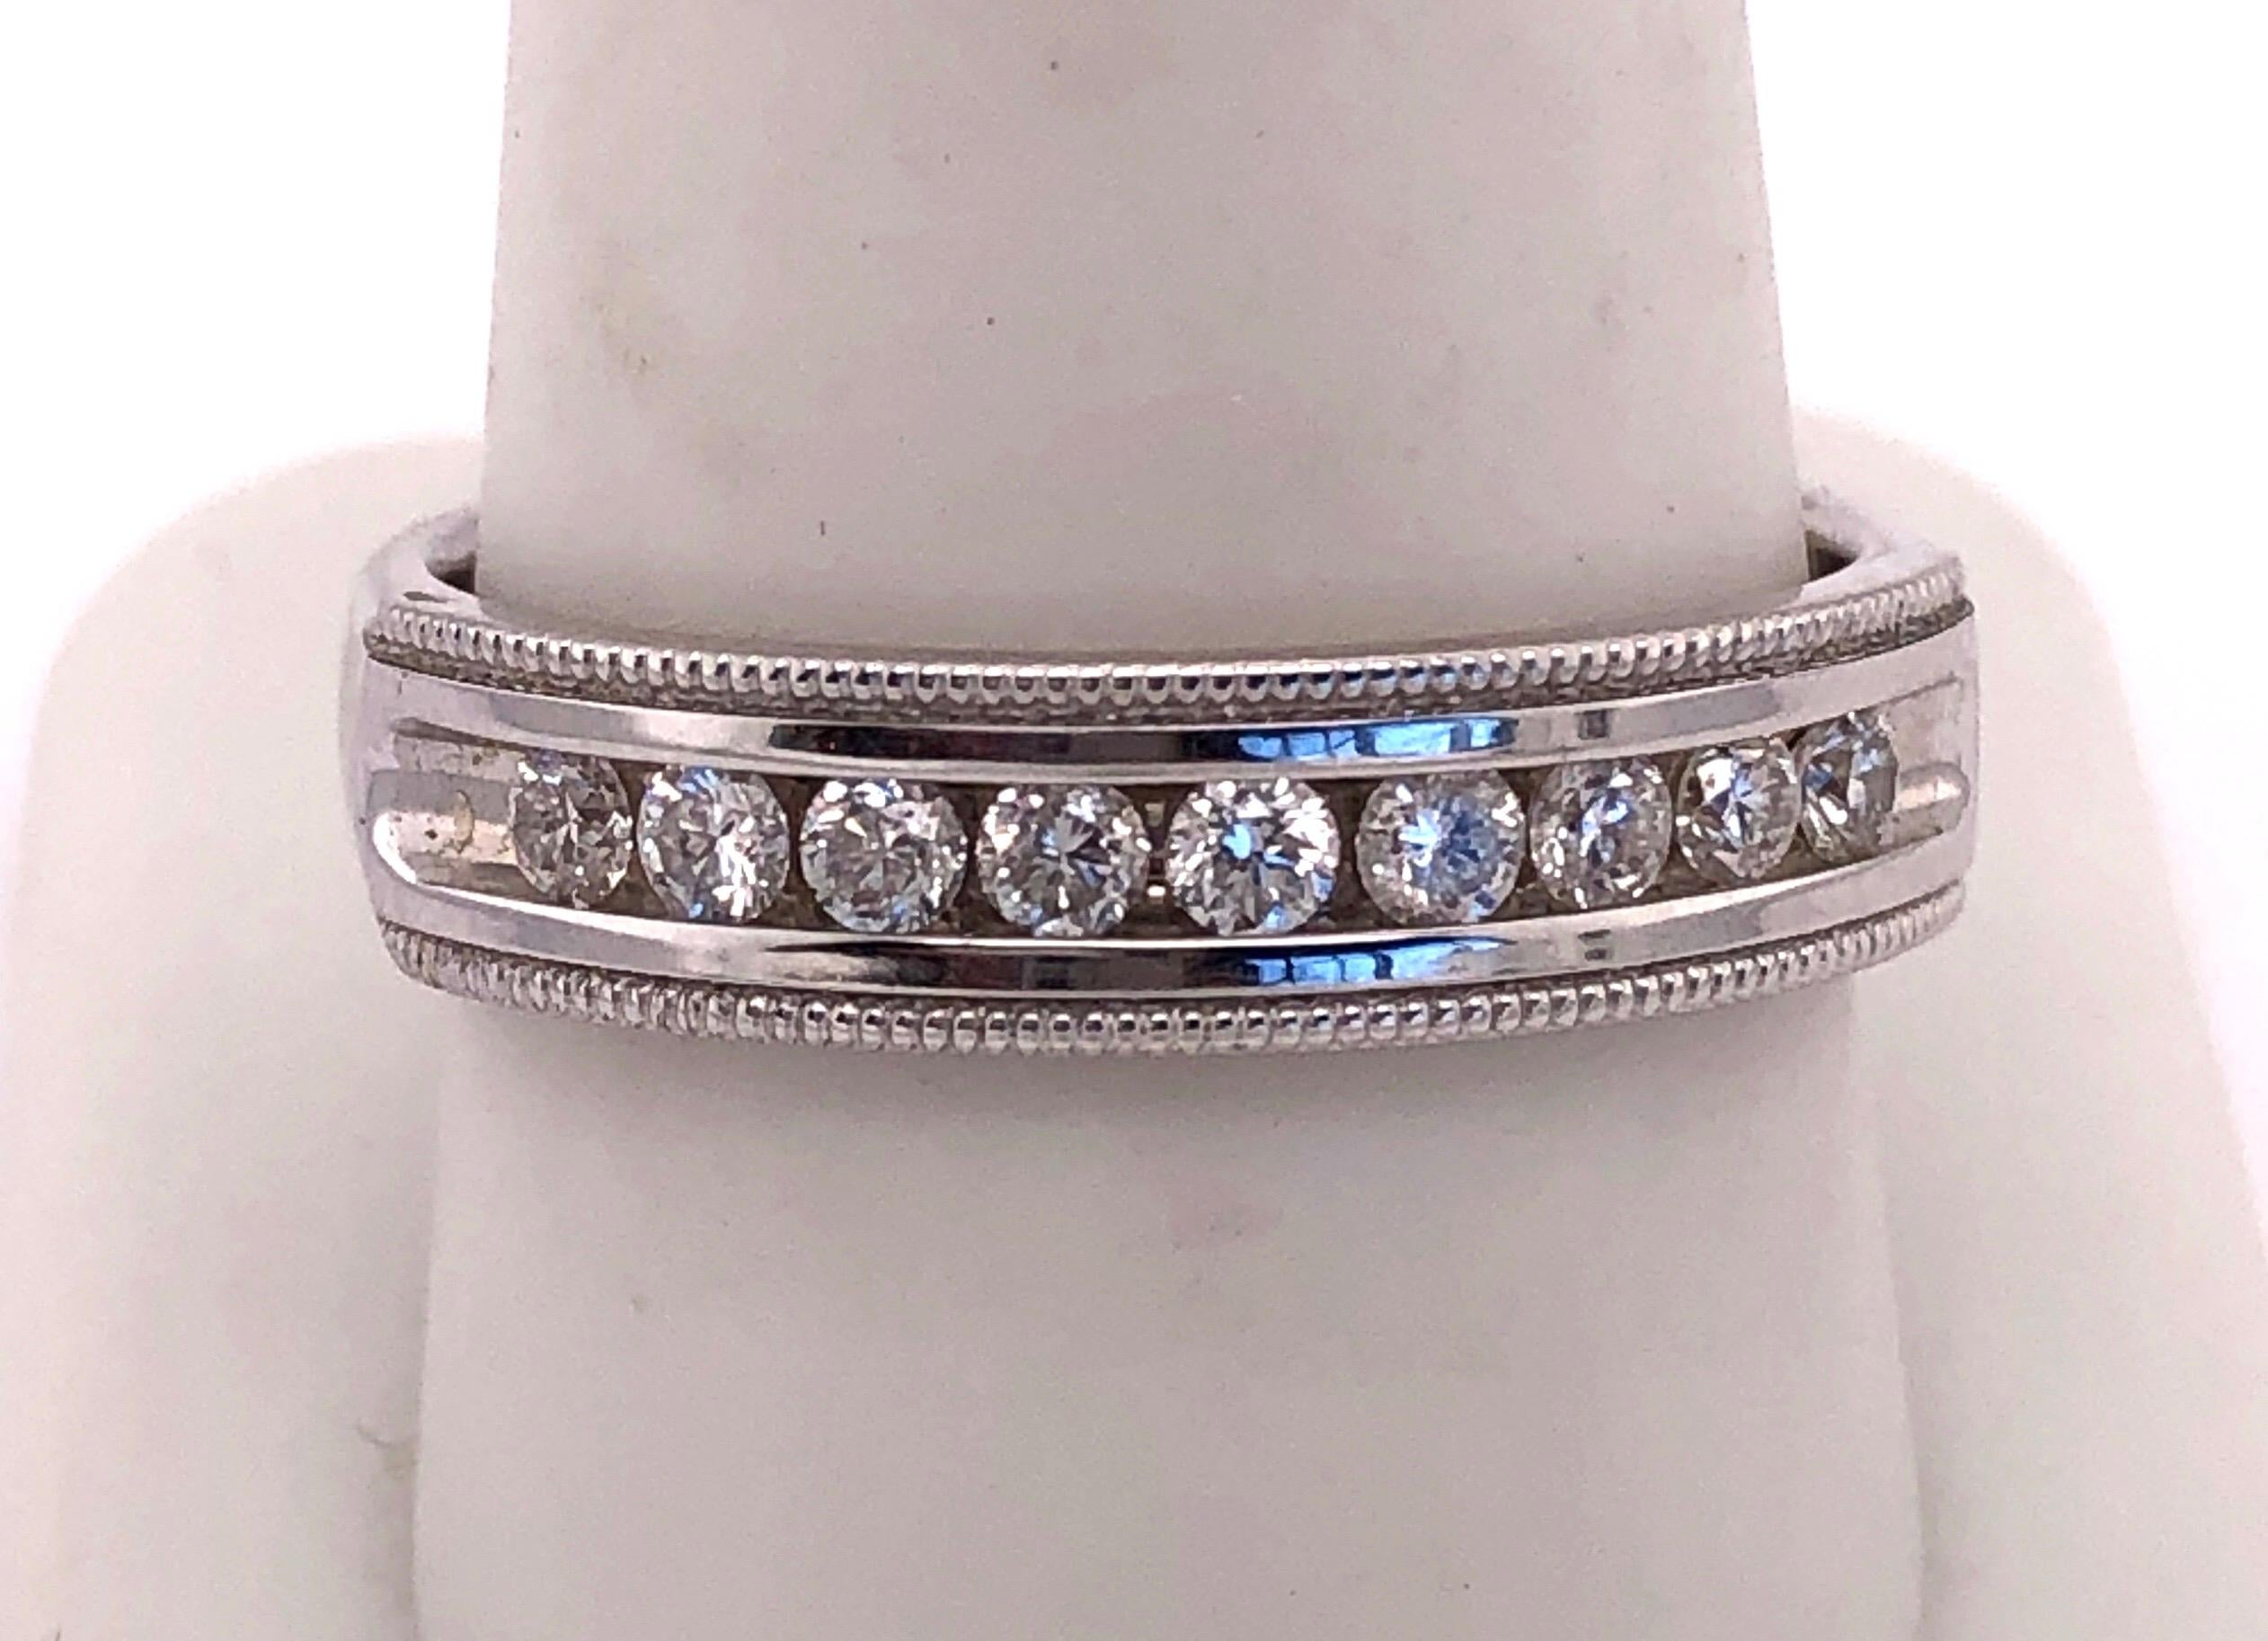 14Kt White Gold Band Ring with Diamonds
6.69 grams total weight